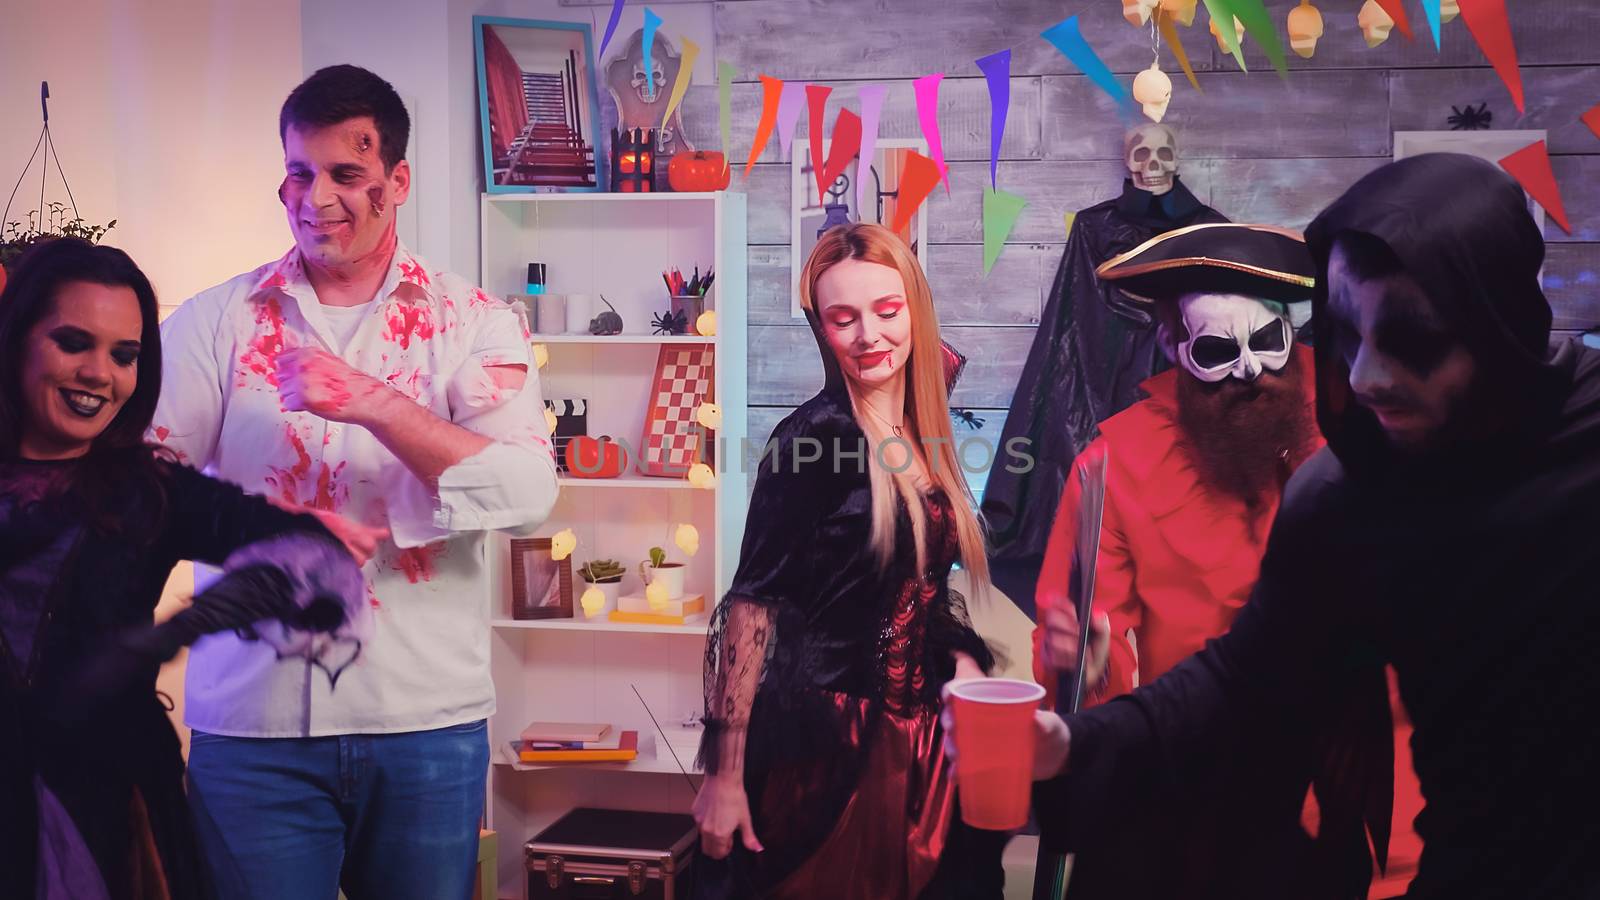 Group of young people disguise in spooky characters at halloween party having fun and dancing in decorated room